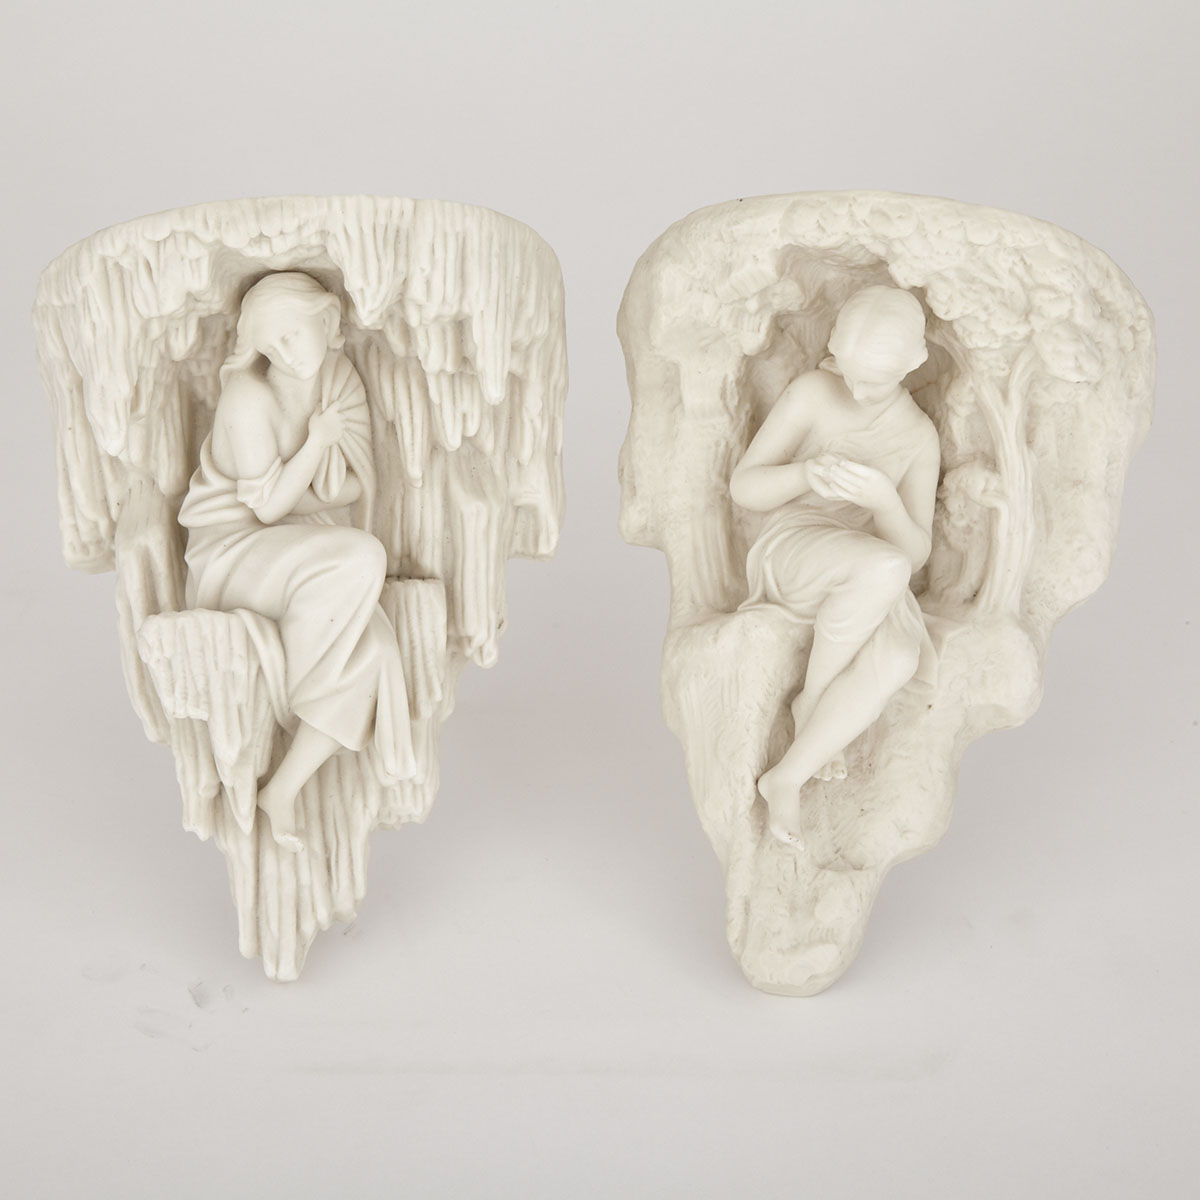 Pair of Worcester Glazed Parian Wall Brackets, ‘Winter’ and ‘Summer’, c.1870